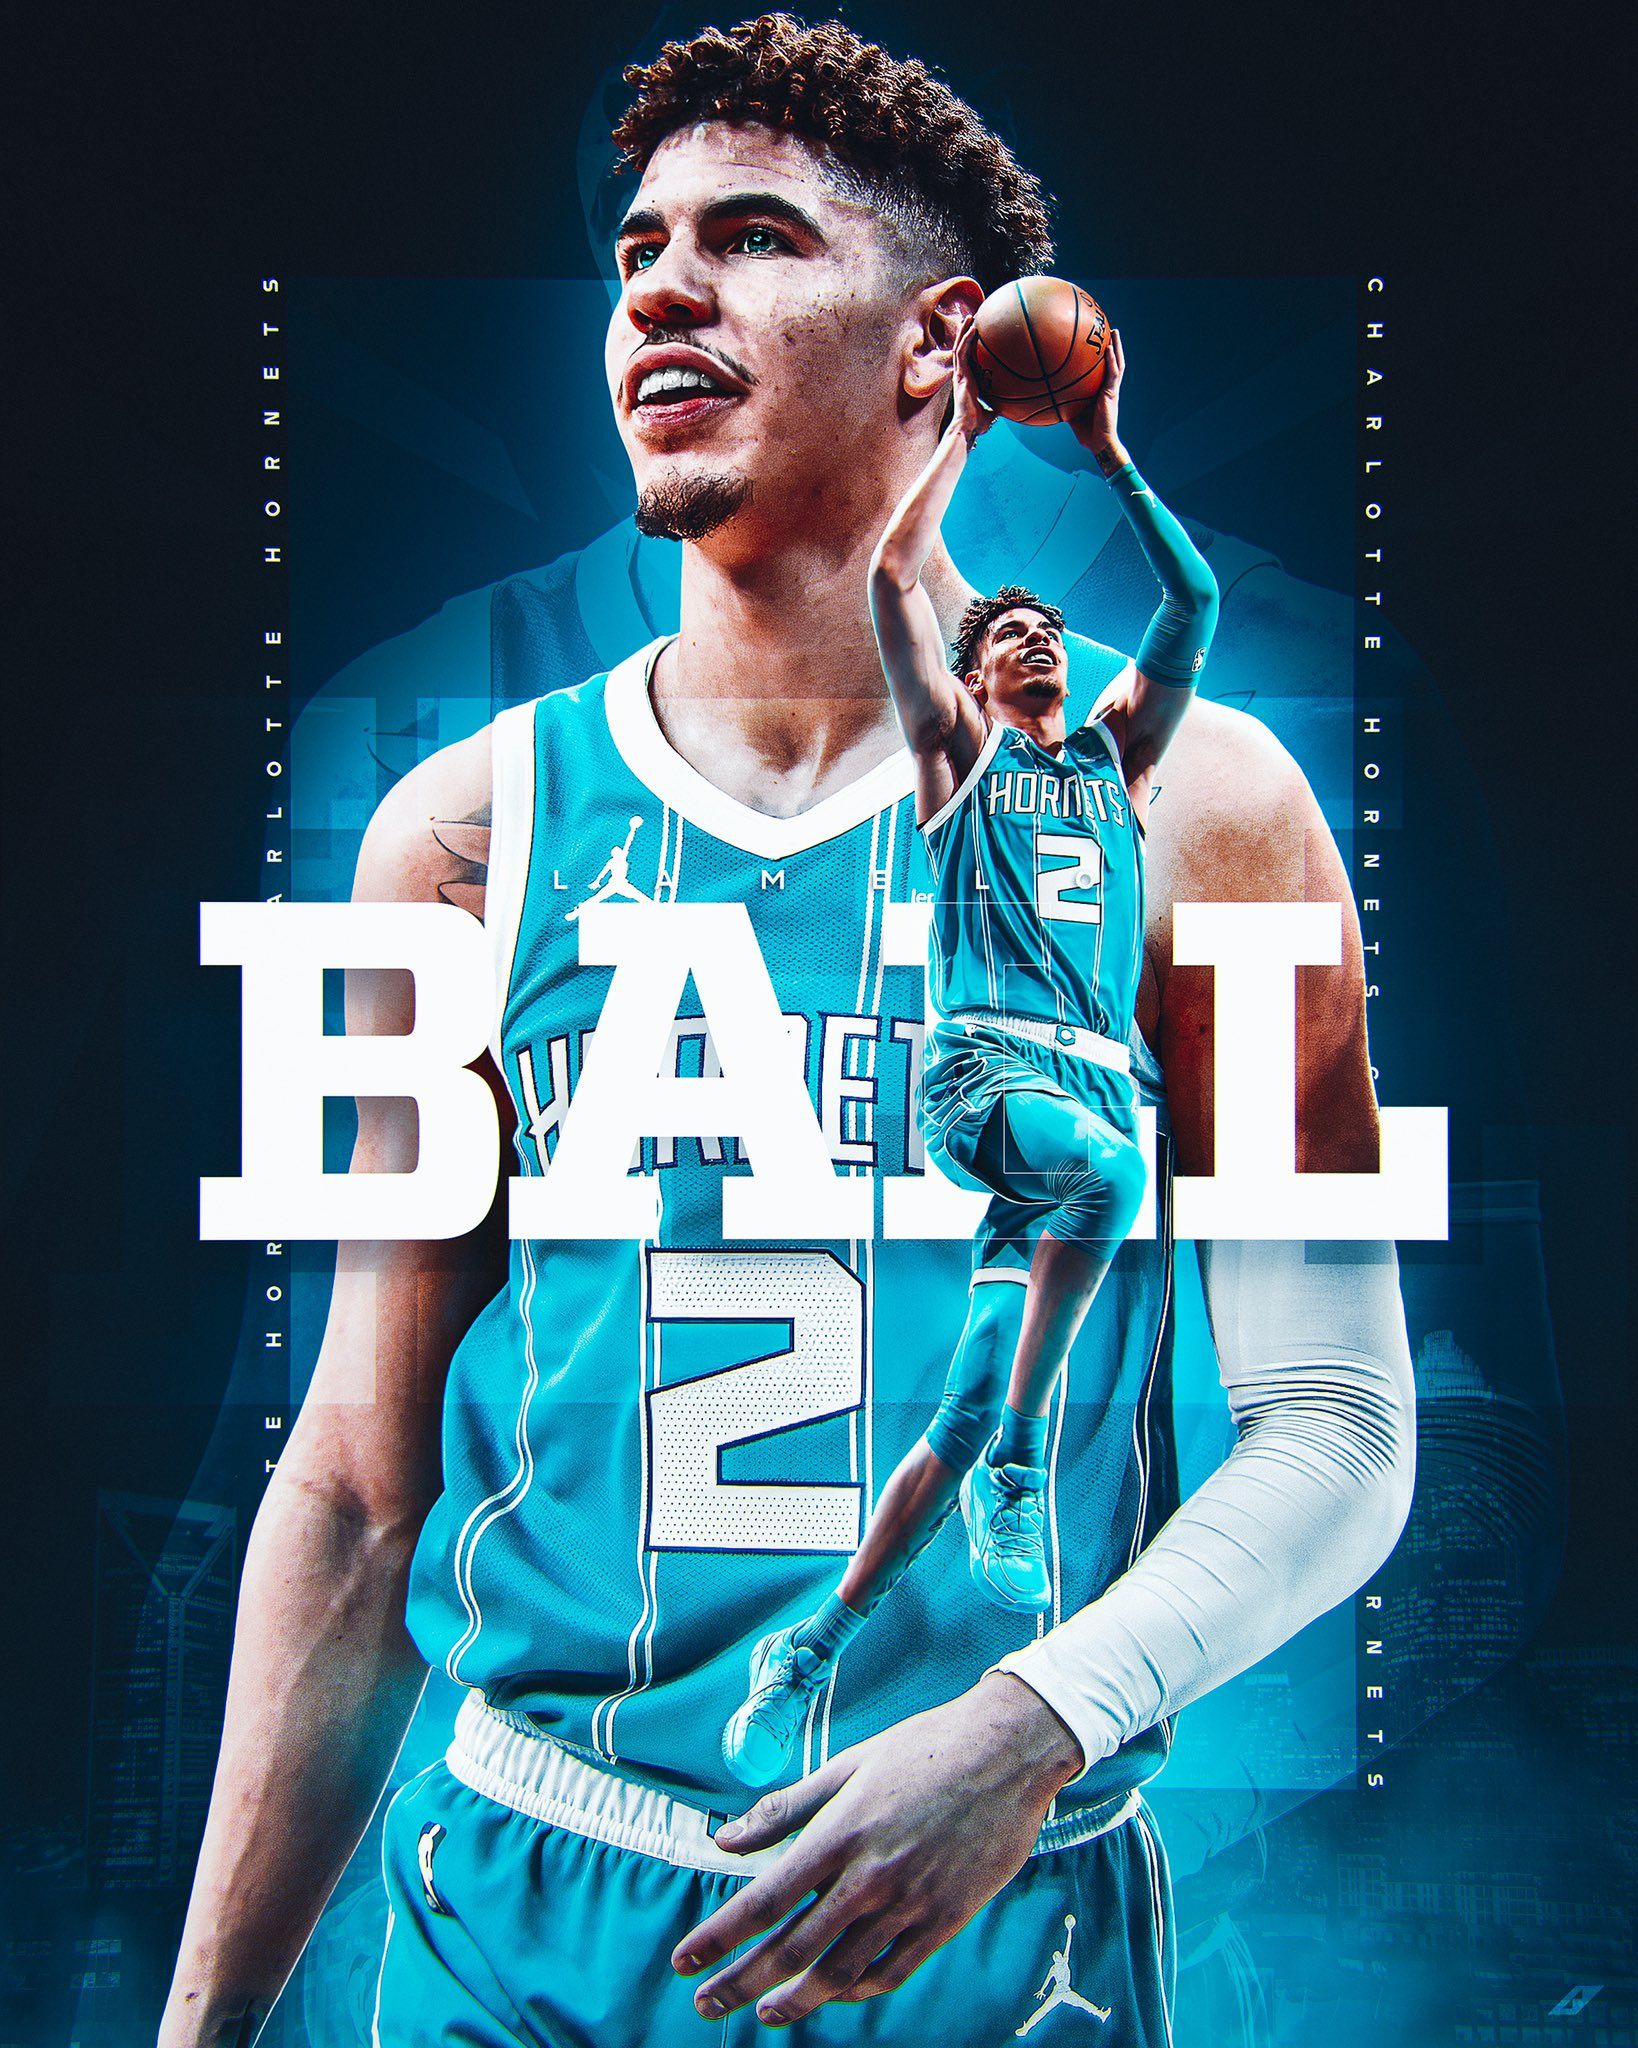 LaMelo Ball Wallpaper Discover more basketball cool Iphone nba wallpapers  httpswwwenjpgcomlameloball12  Lamelo ball Basketball clothes  Lonzo ball